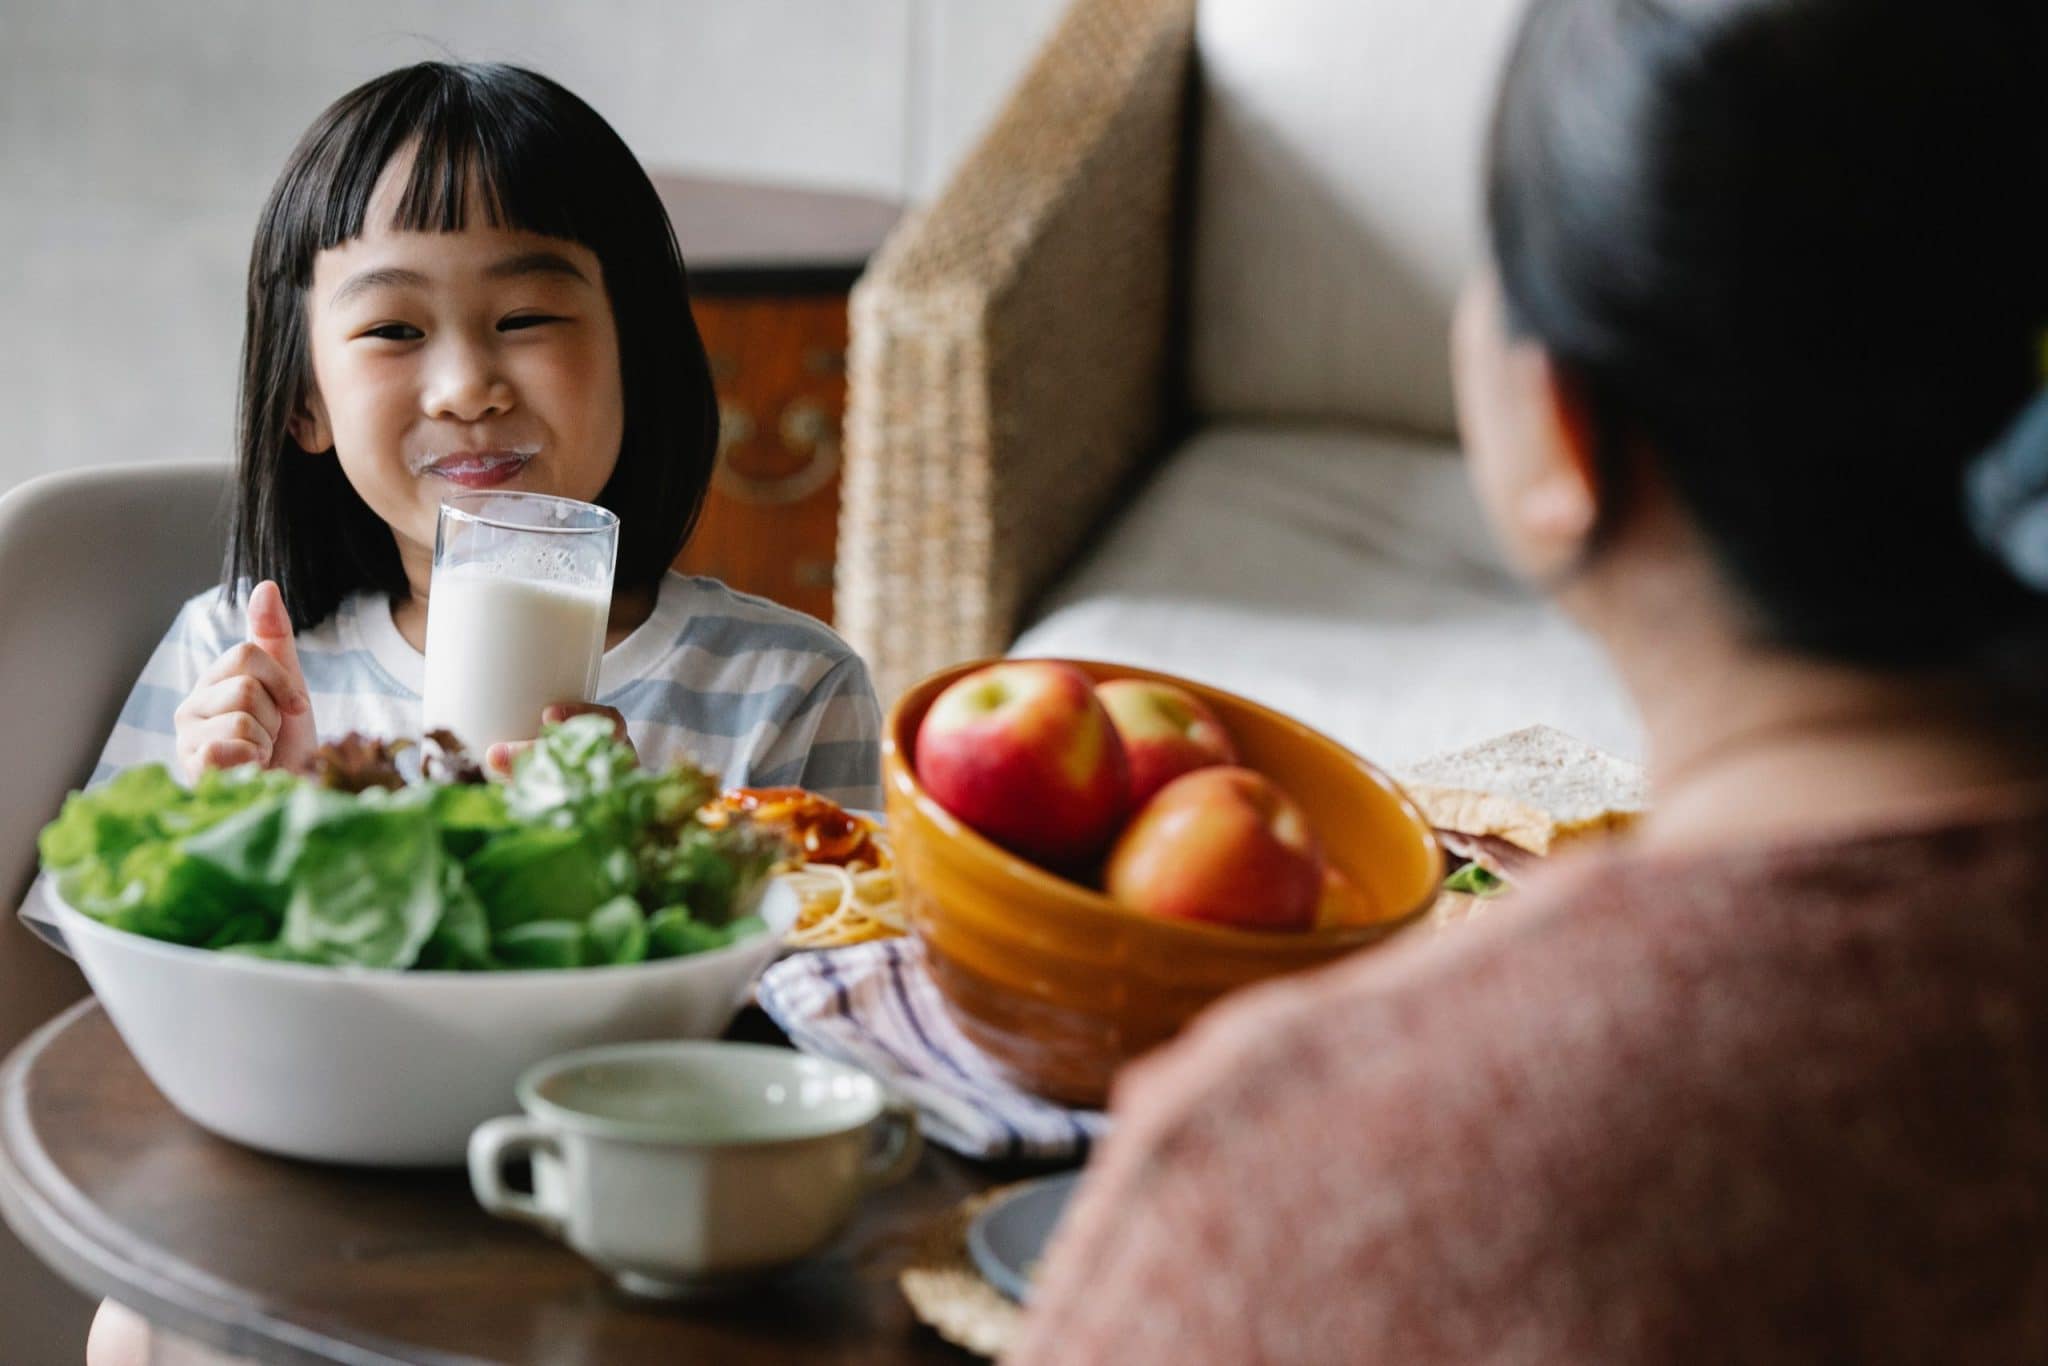 A happy child and her mother eat a meal together with a good mix of probiotic and prebiotic foods including apples and leafy greens.